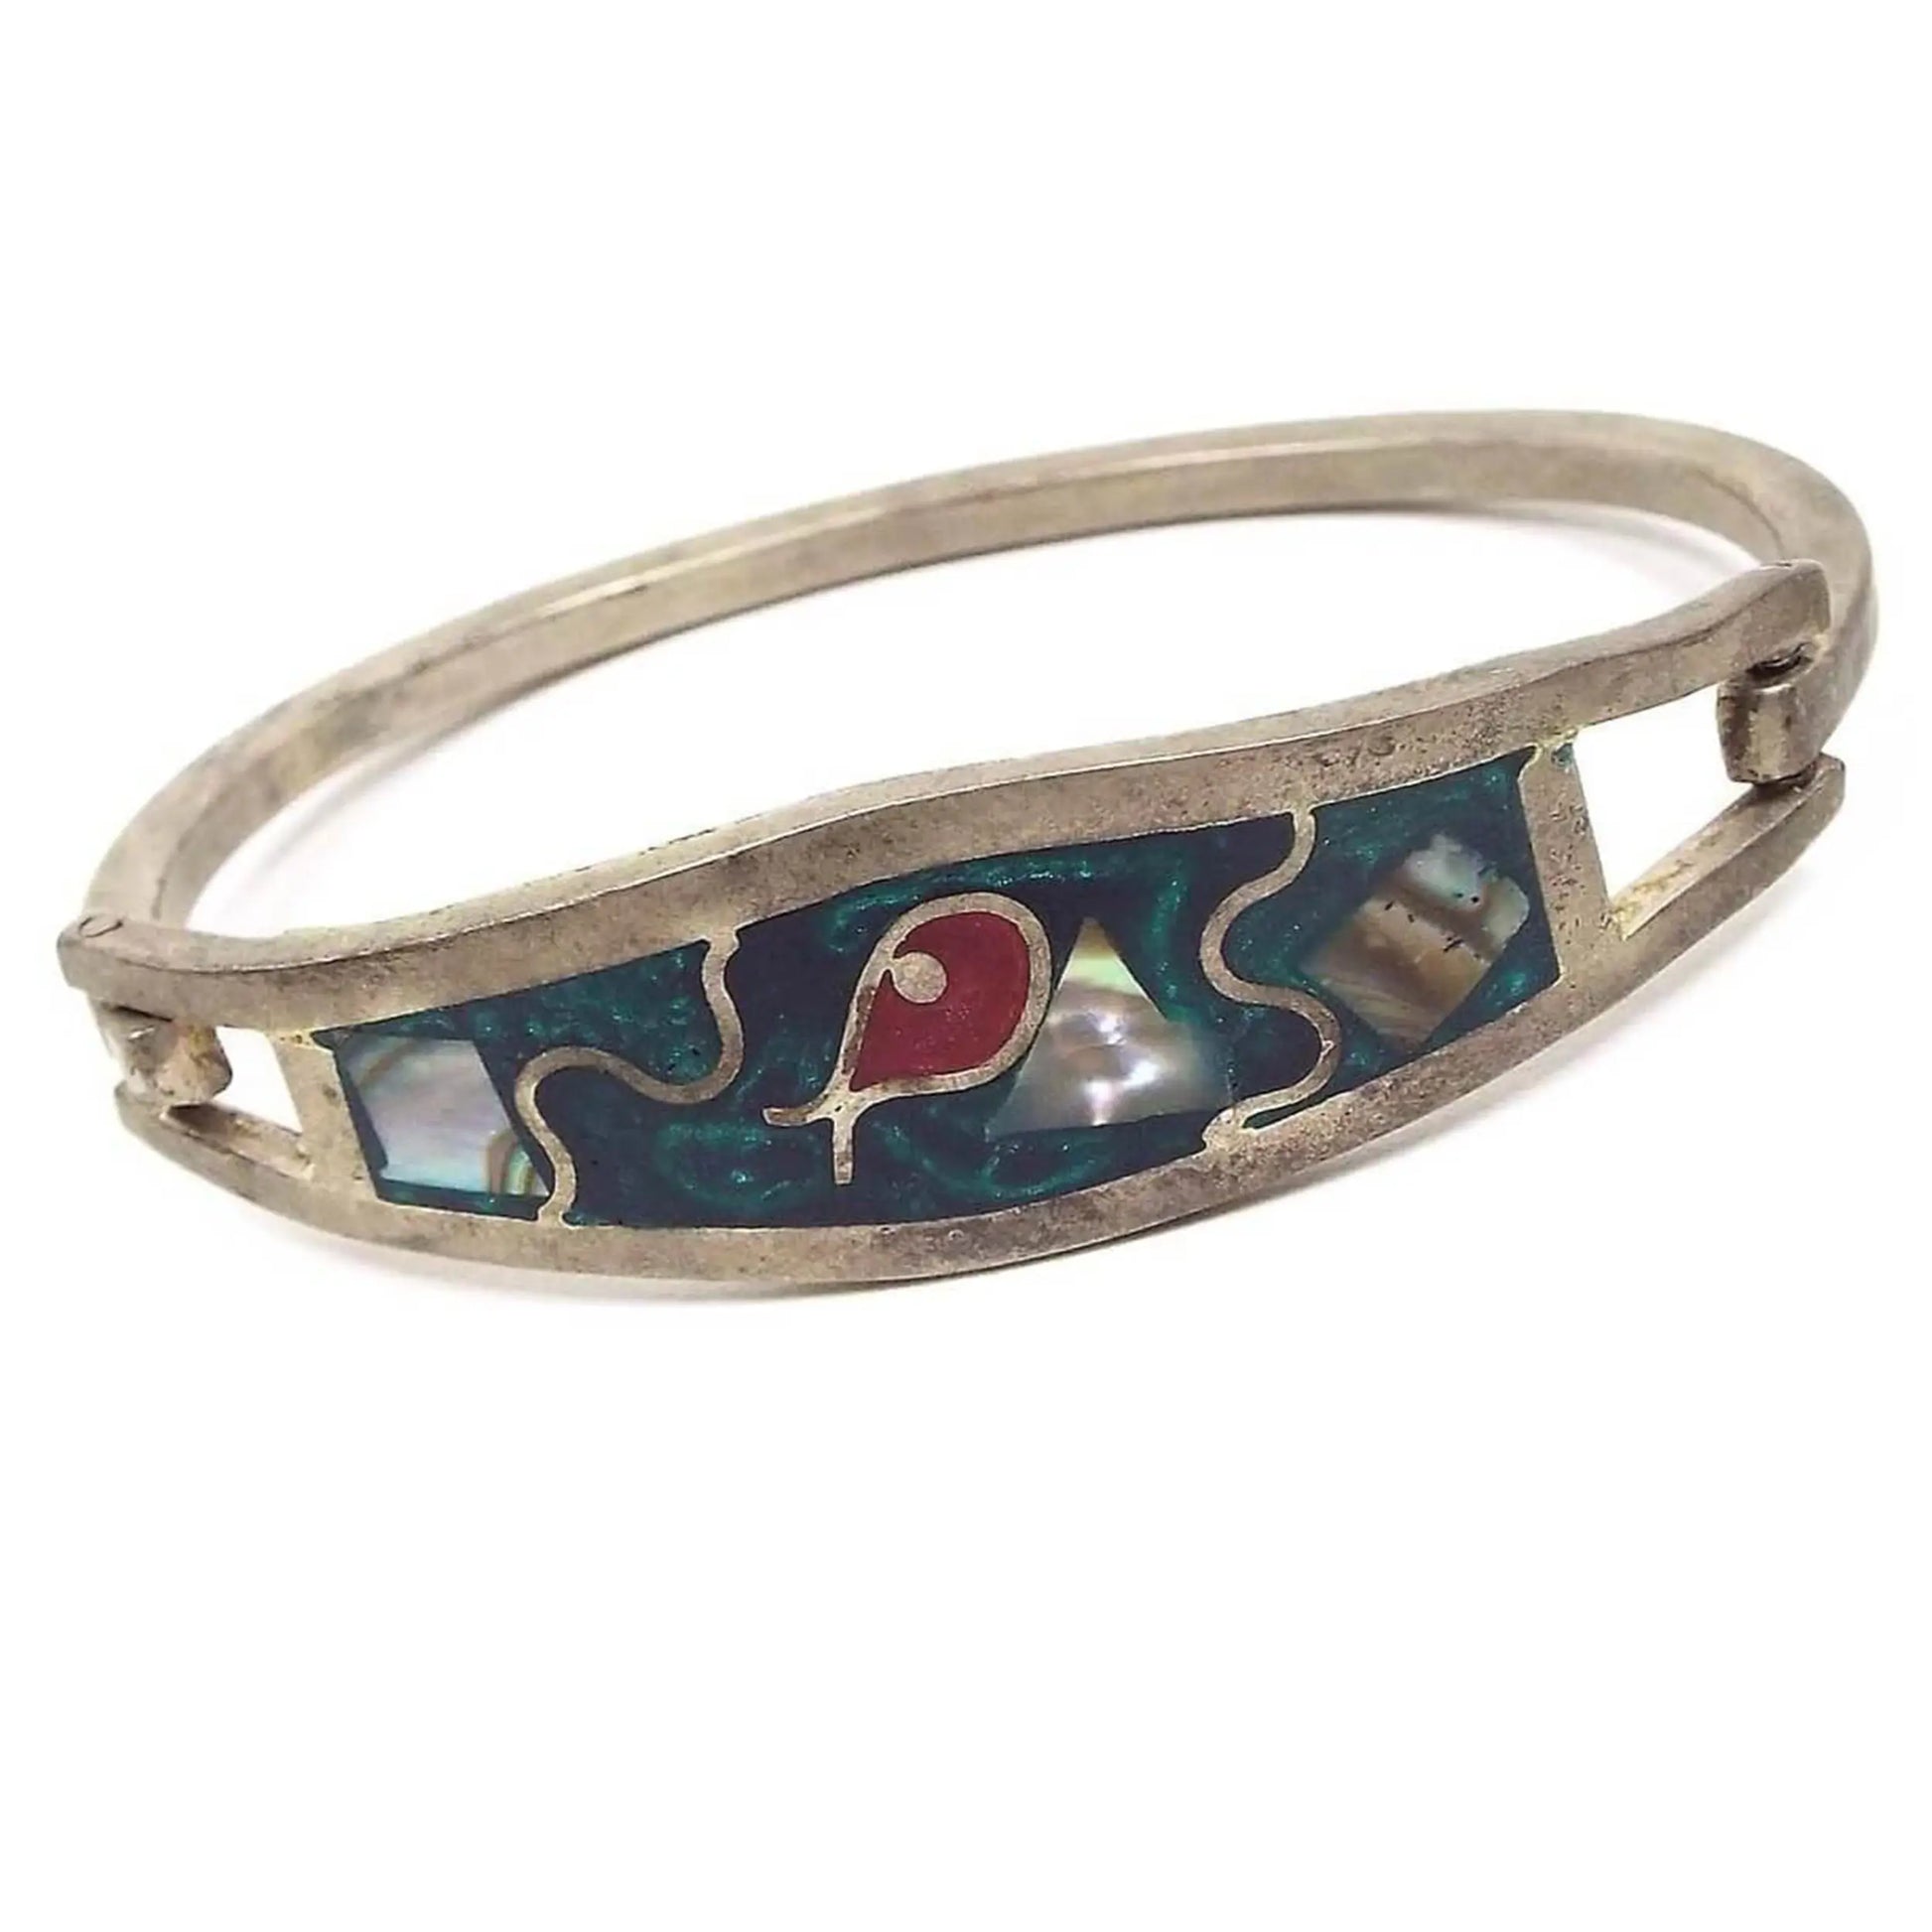 Front view of the Mexican vintage hinged bangle bracelet. It is silver tone in color and has a dark pearly green enamel on the front. There is a small red enameled fish and three pieces of inlaid abalone shell in the design.